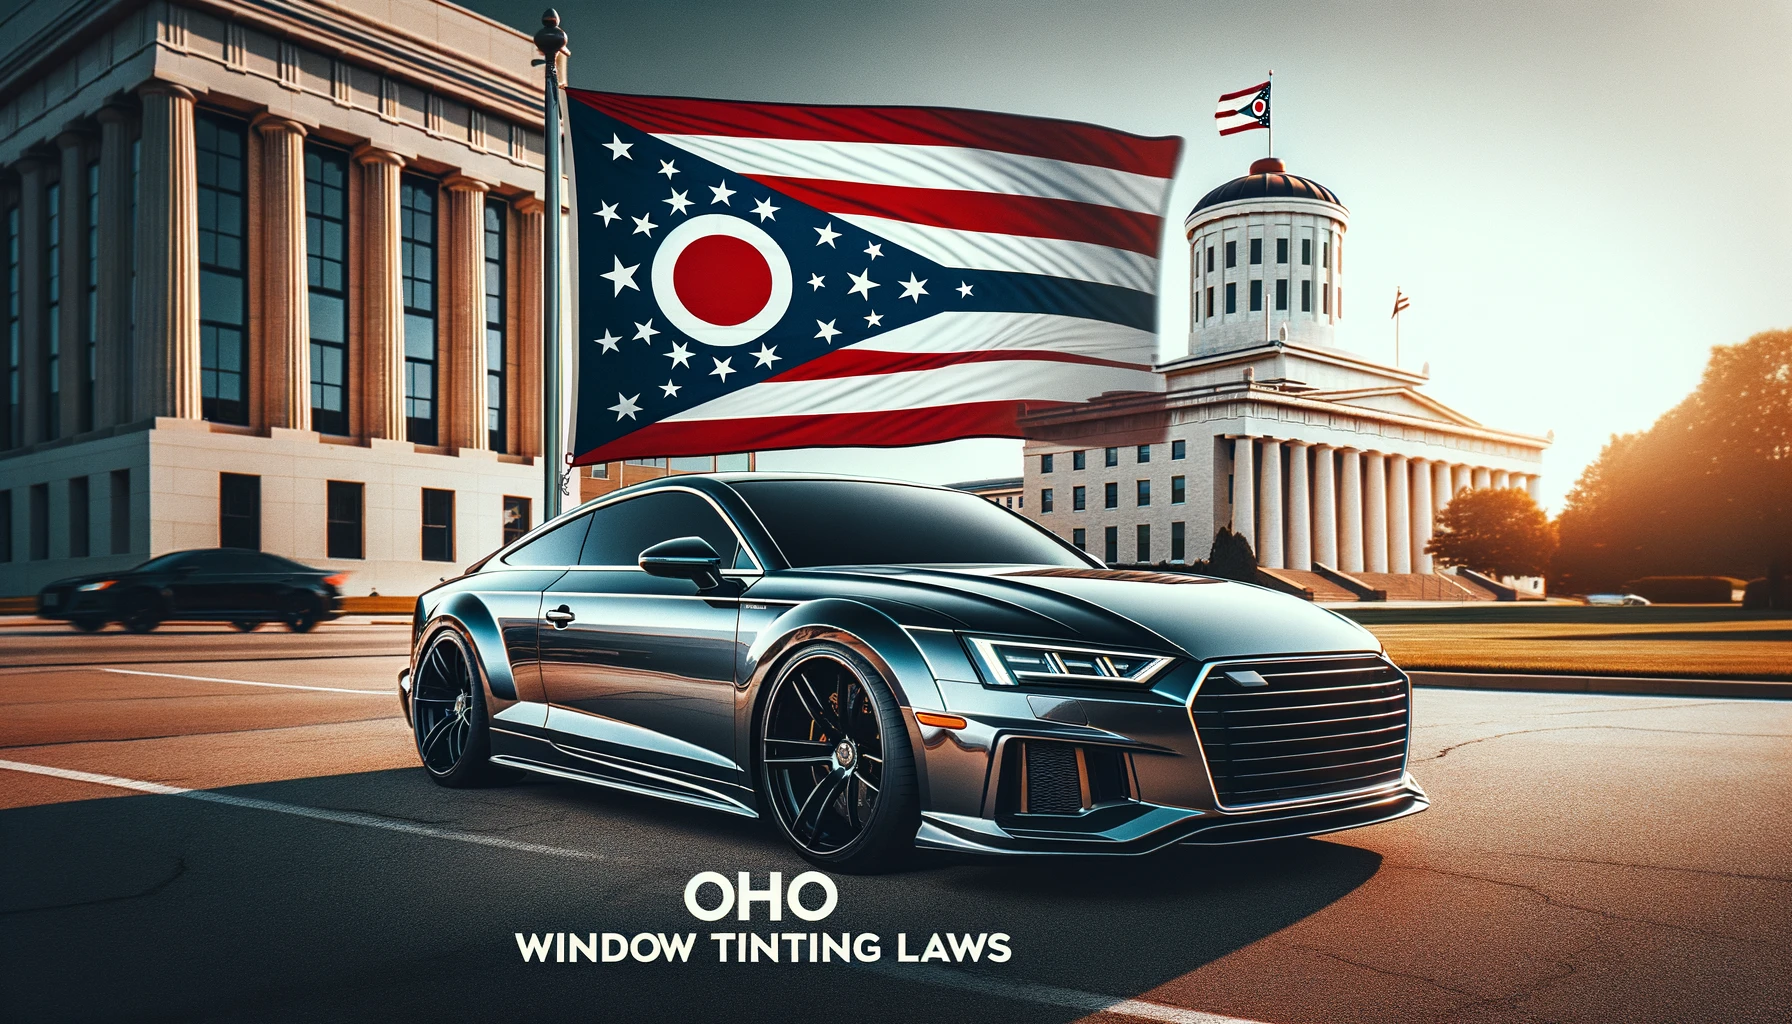 Photo of a sleek car with tinted windows parked on a street in Ohio during daytime